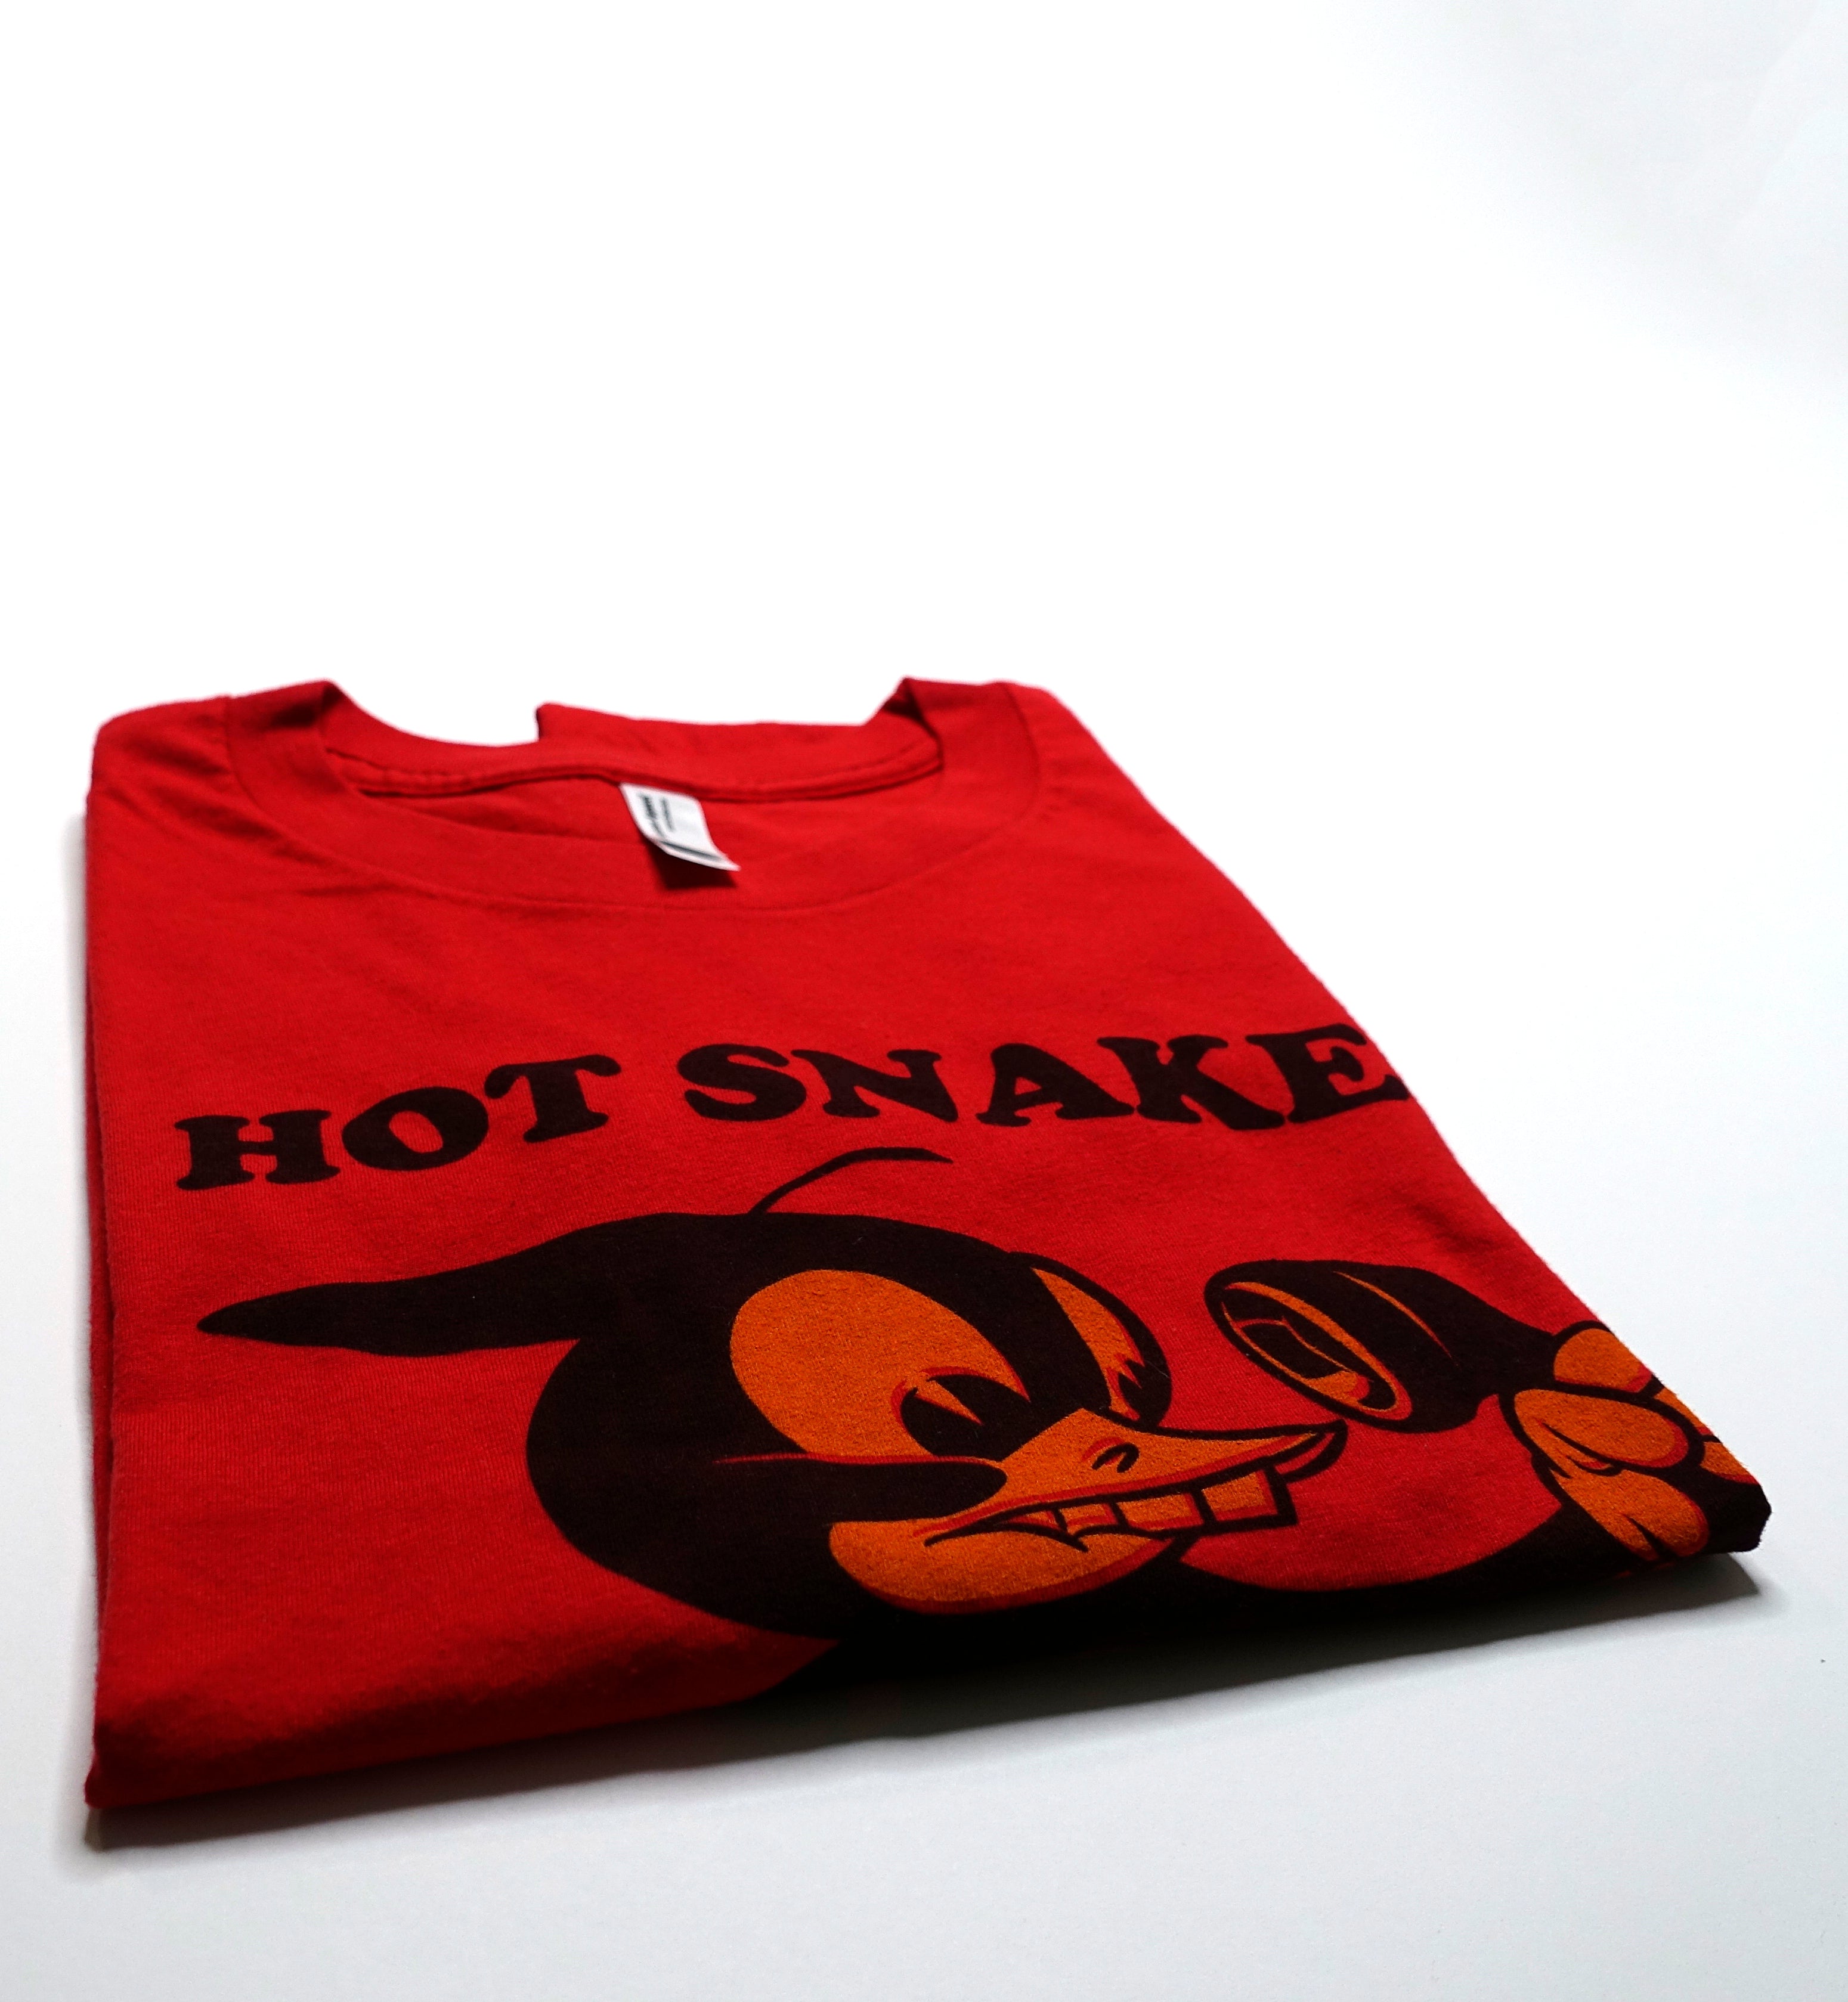 Hot Snakes - Javier / It's For You! Tour Shirt Size Large (Red)